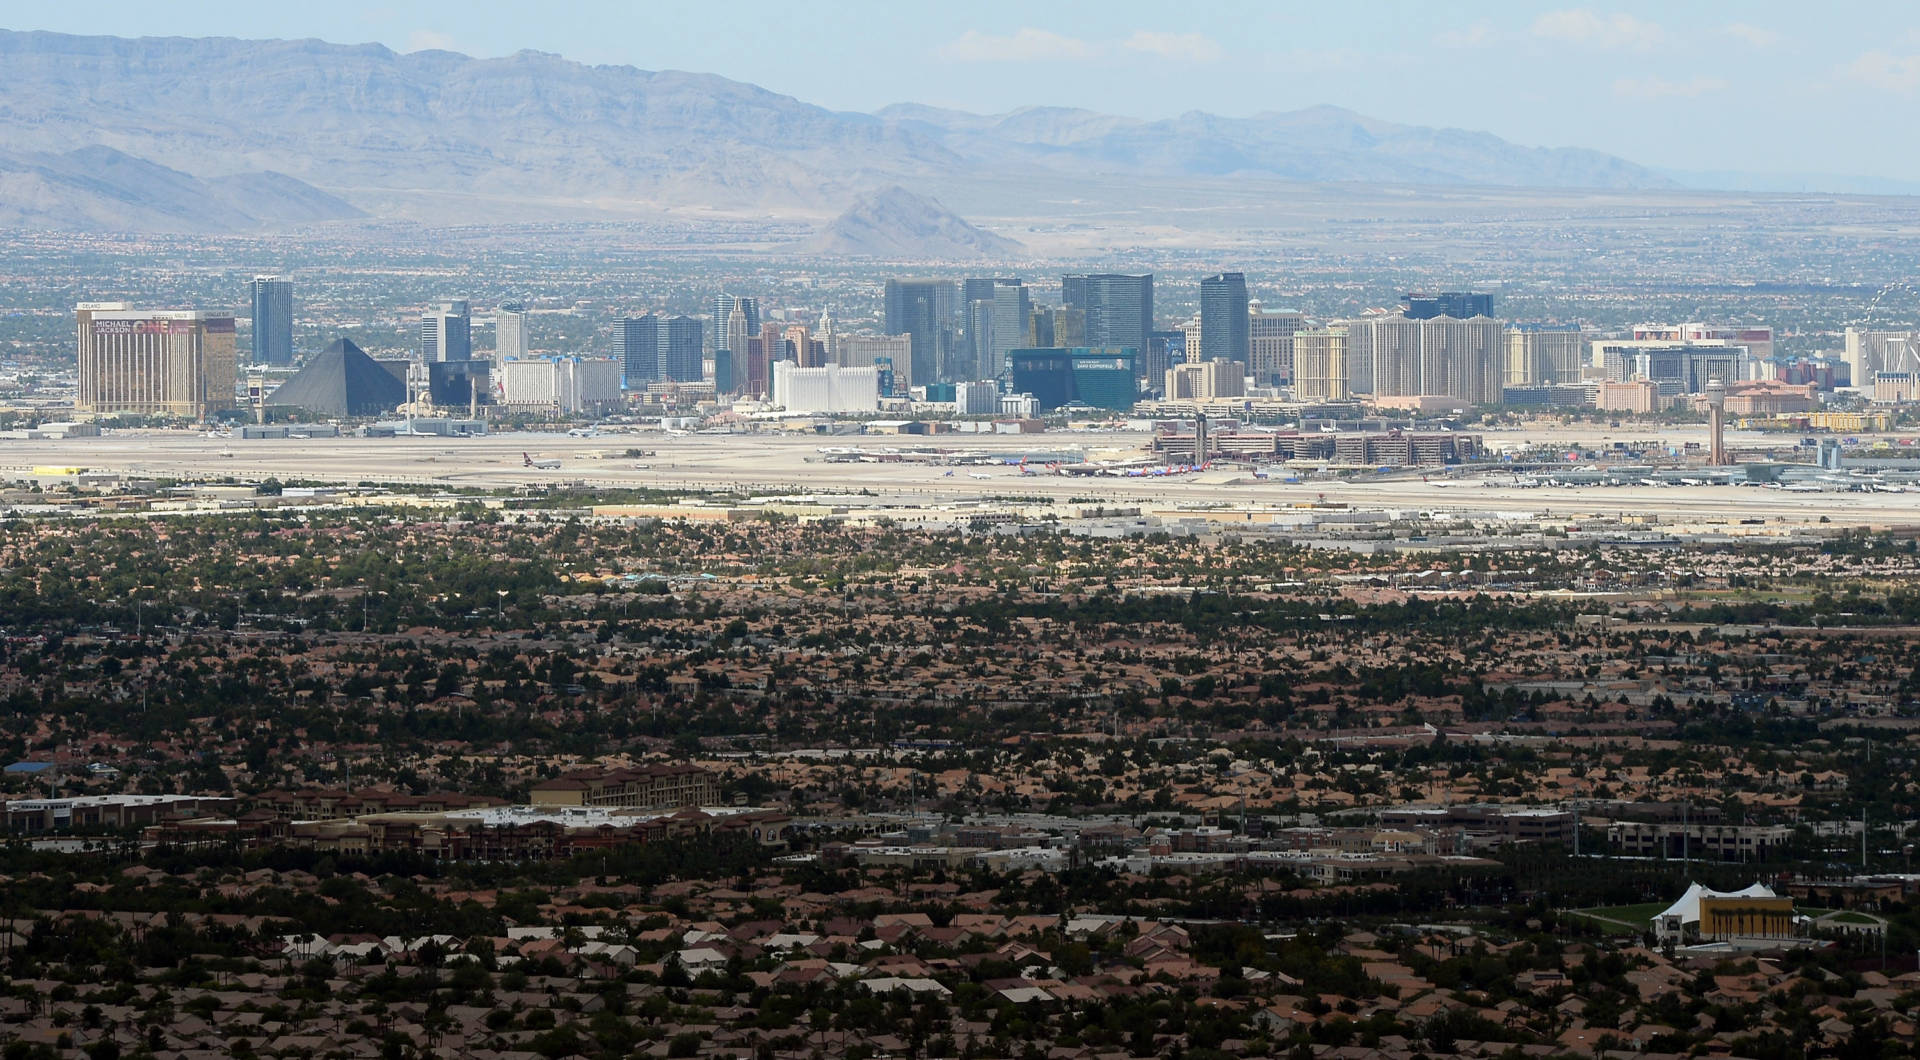 Californians have poured across the state line over the past few years, fleeing high housing costs. Now, some Nevada Republicans fear the state will begin to resemble its deep blue neighbor. Ethan Miller/Getty Images for Ascaya